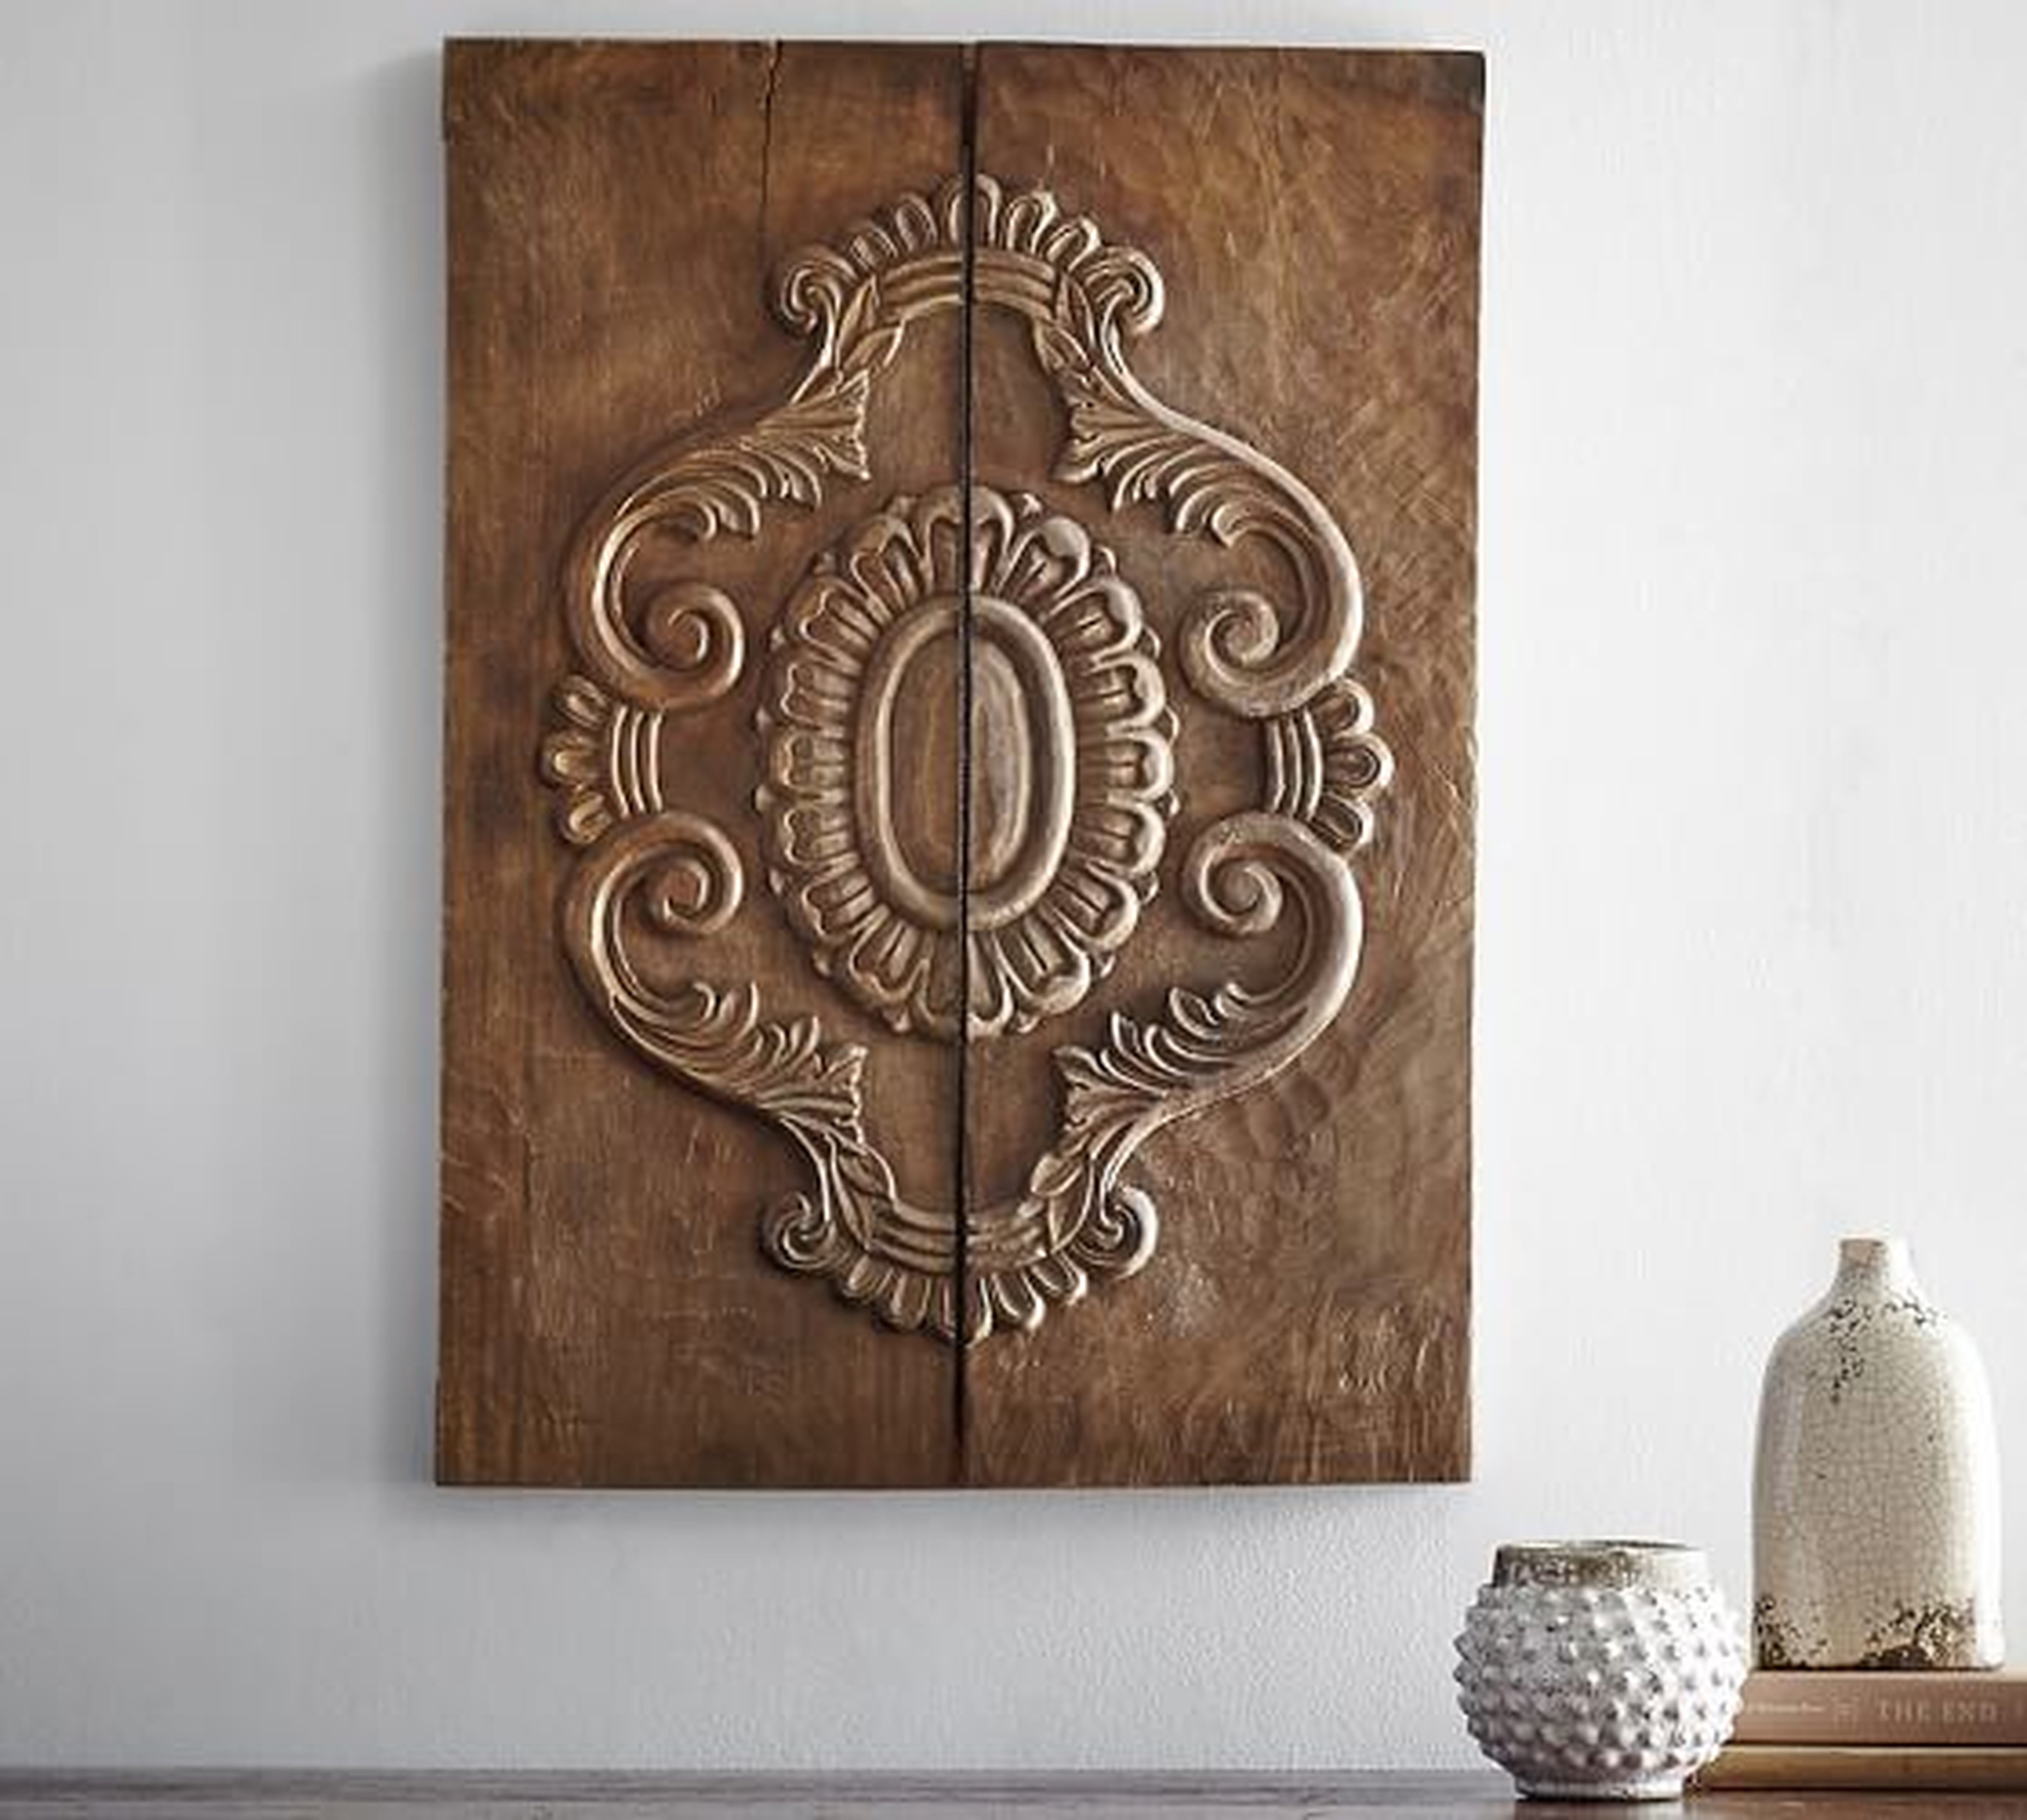 Carved Wood Plank Art - Pottery Barn